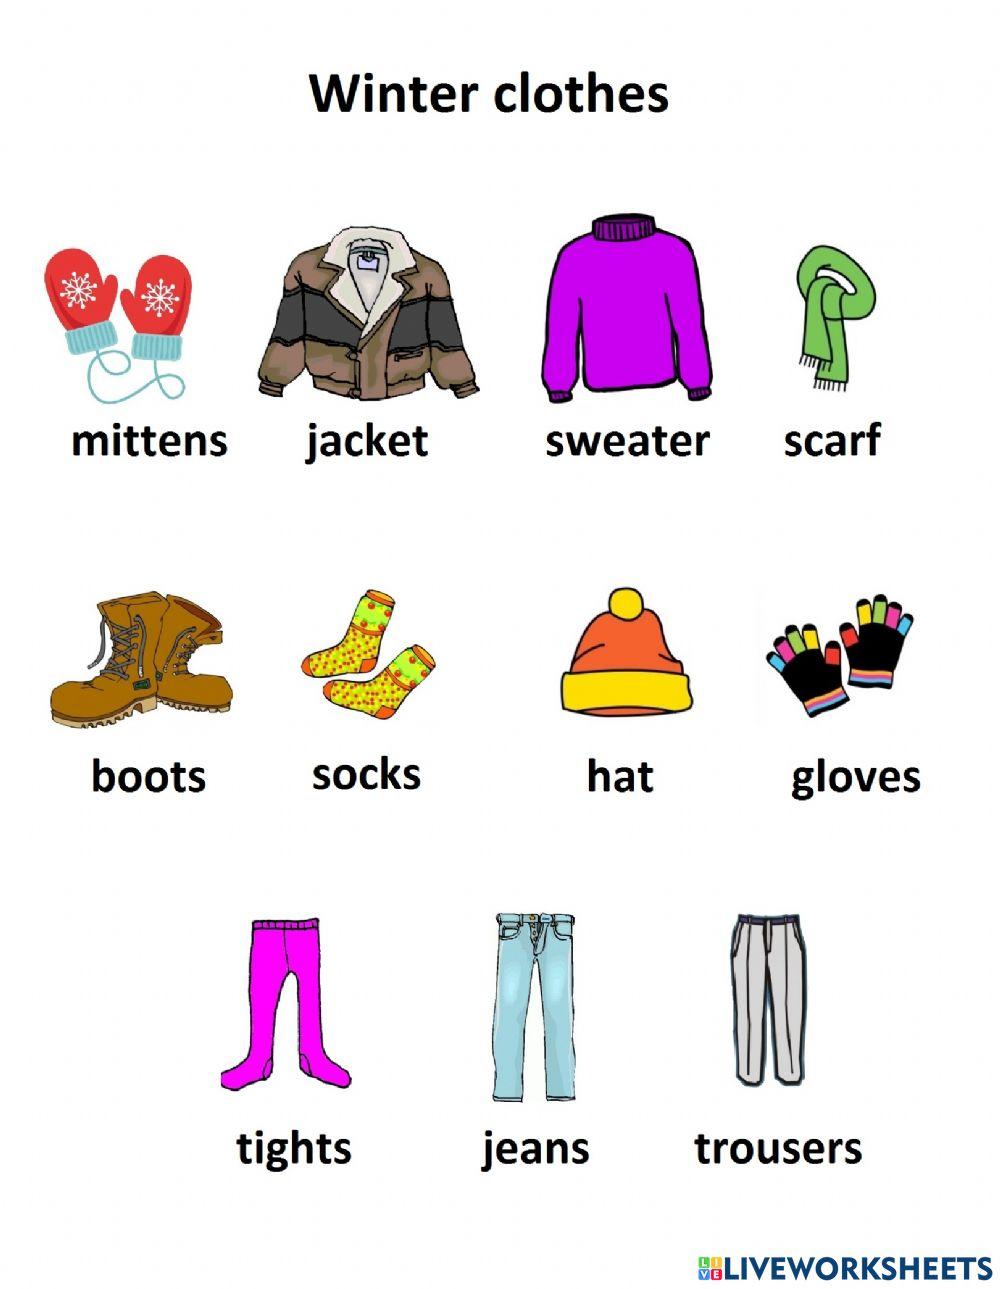 Winter clothes online exercise for preschool | Live Worksheets